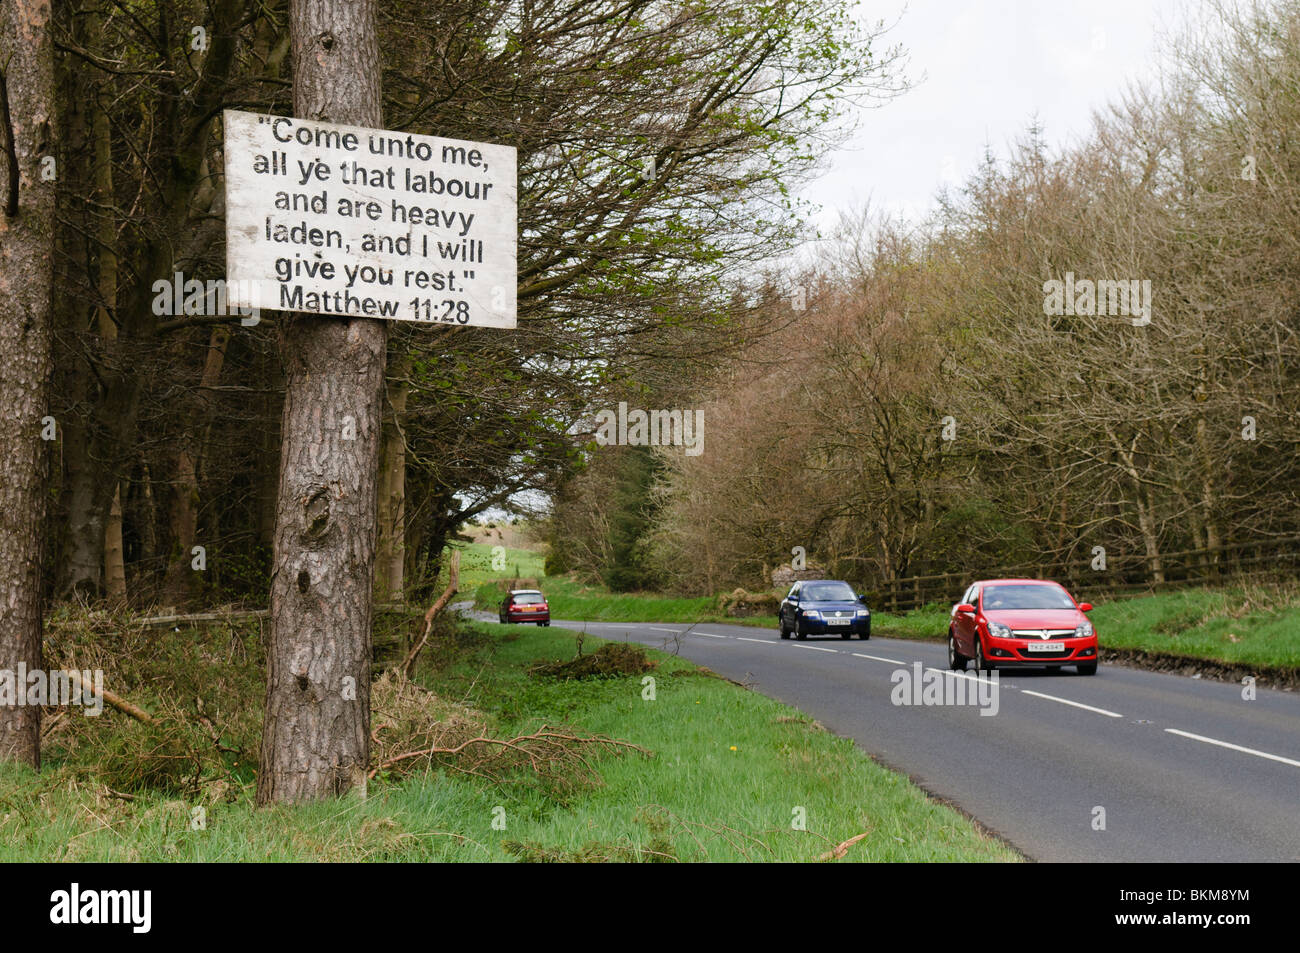 Sign with a bible verse nailed to a tree by the side of a road with traffic Stock Photo